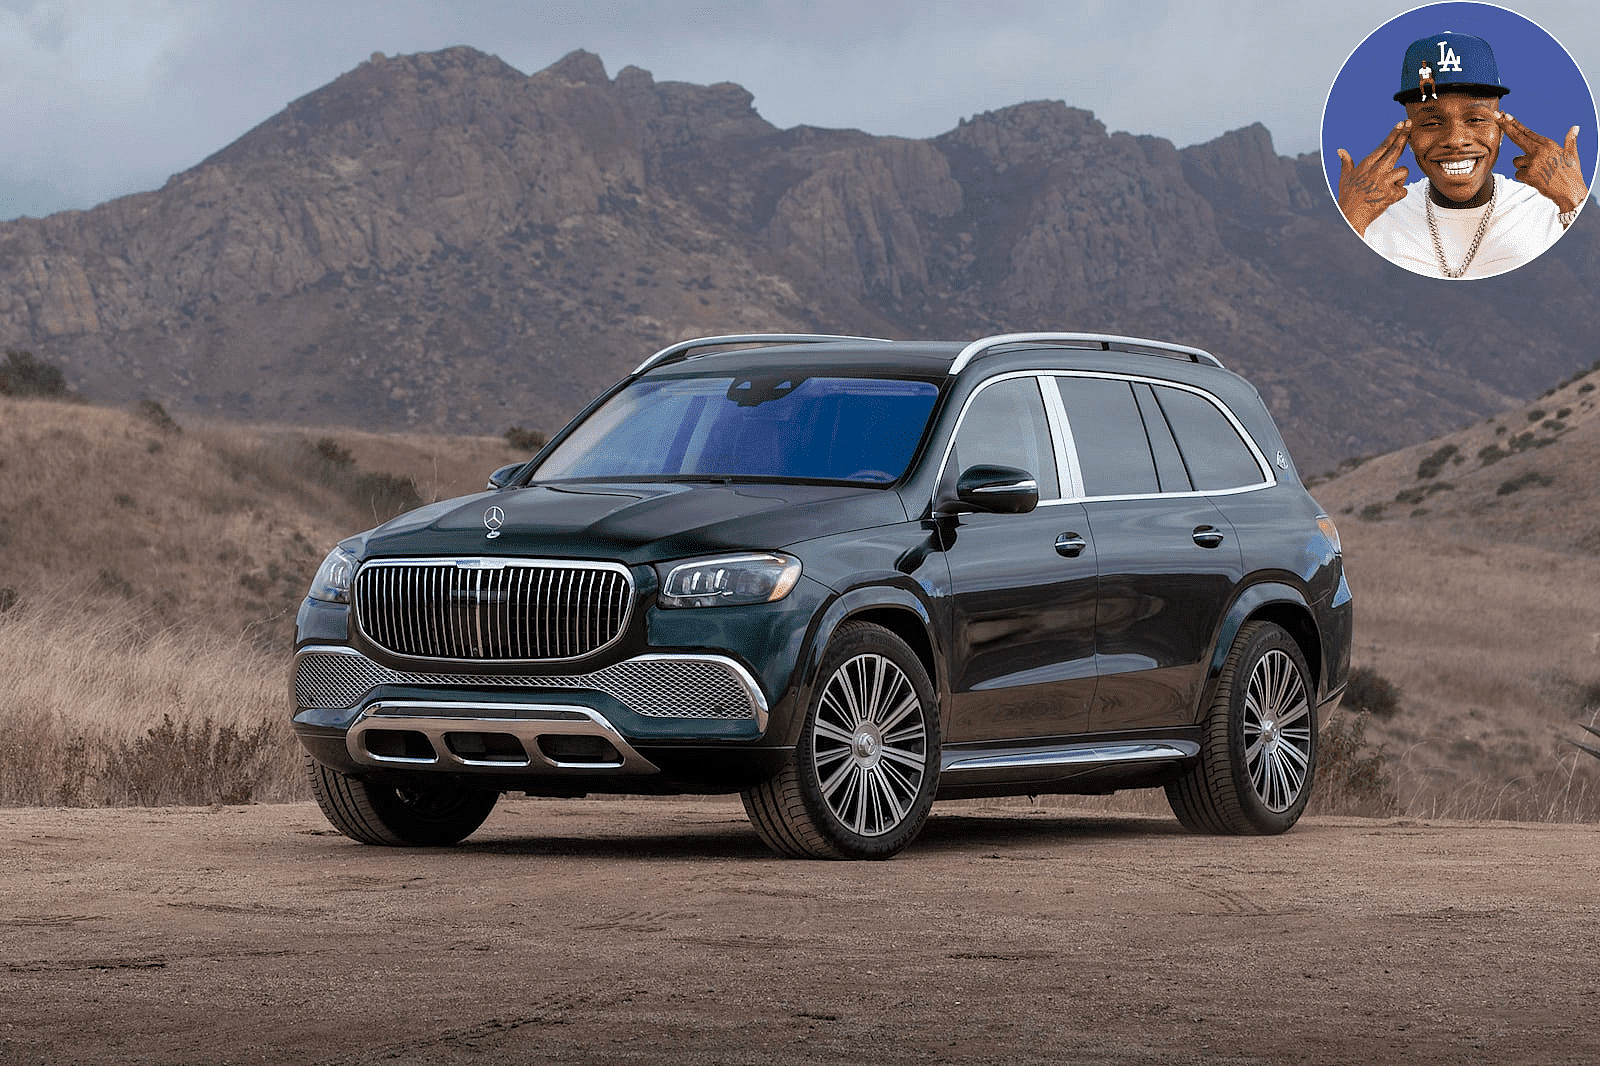 Rapper DaBaby with Mercedes Maybach GLS 600